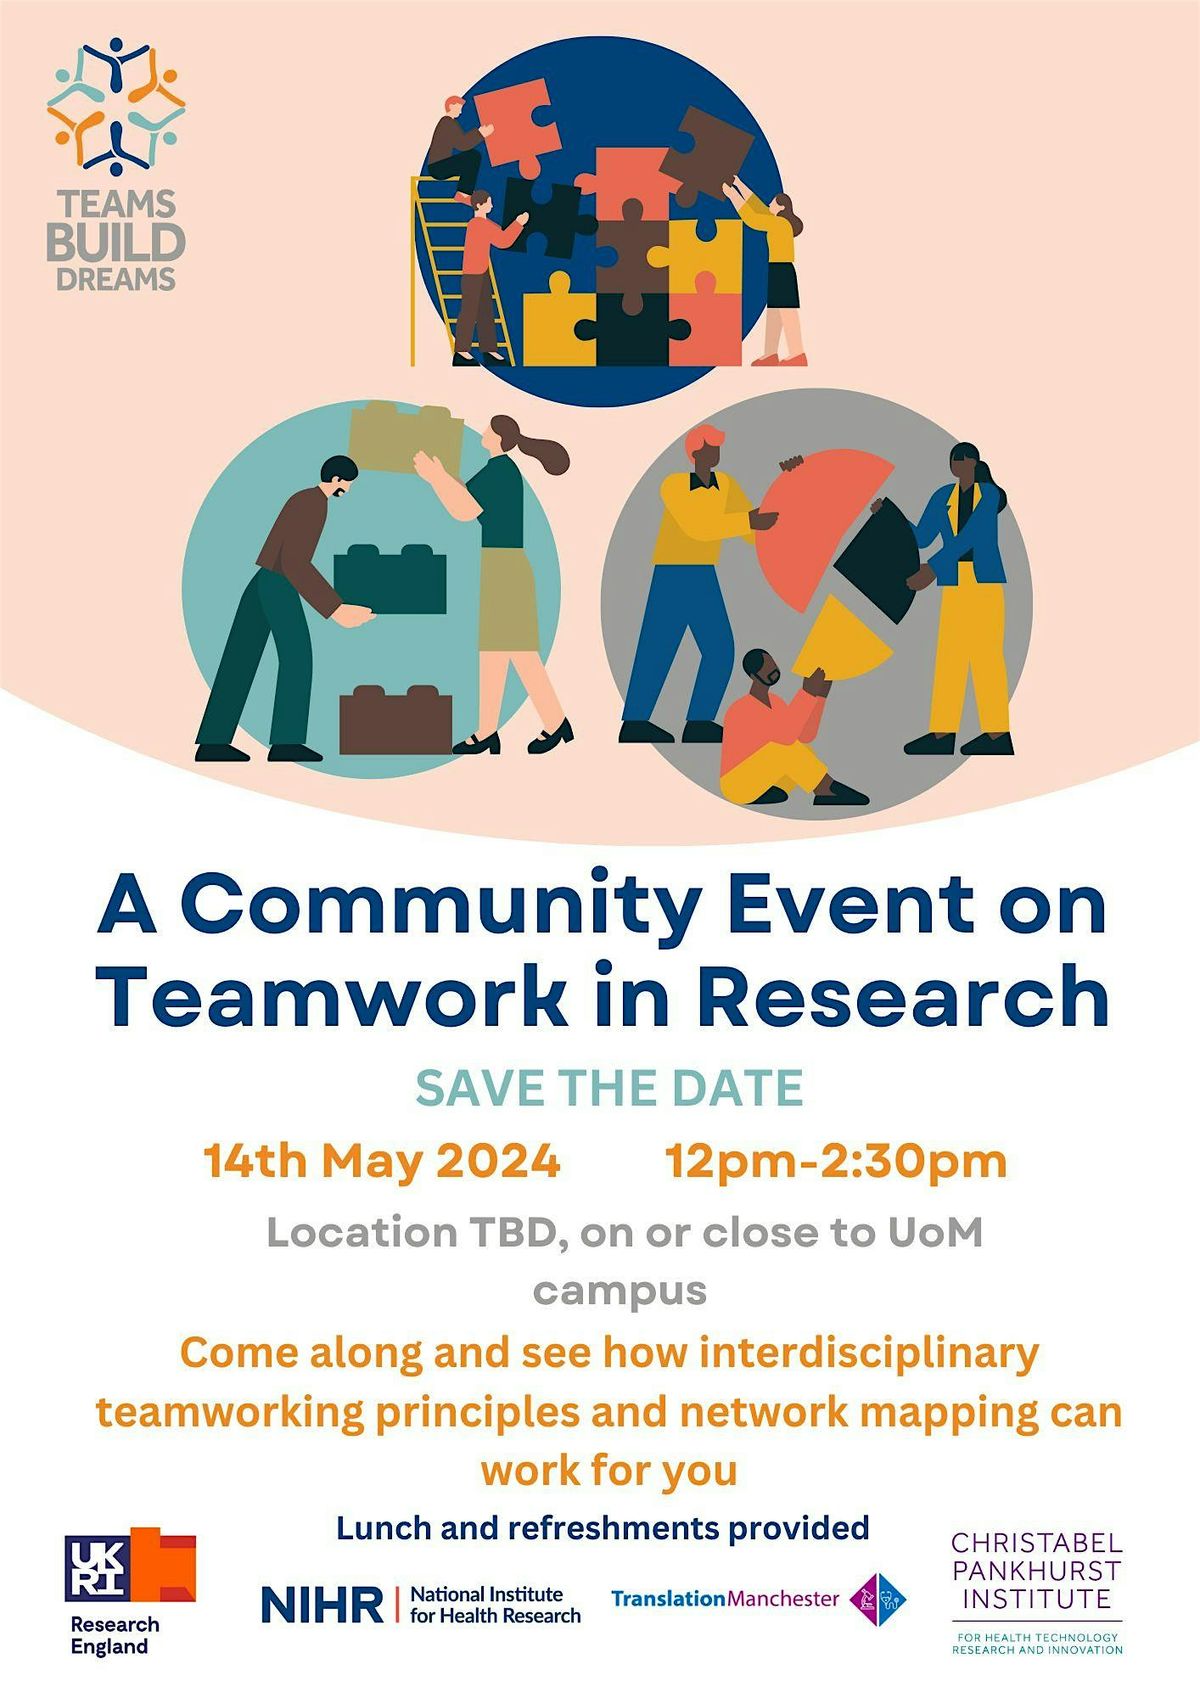 A Community Event on Teamwork in Research